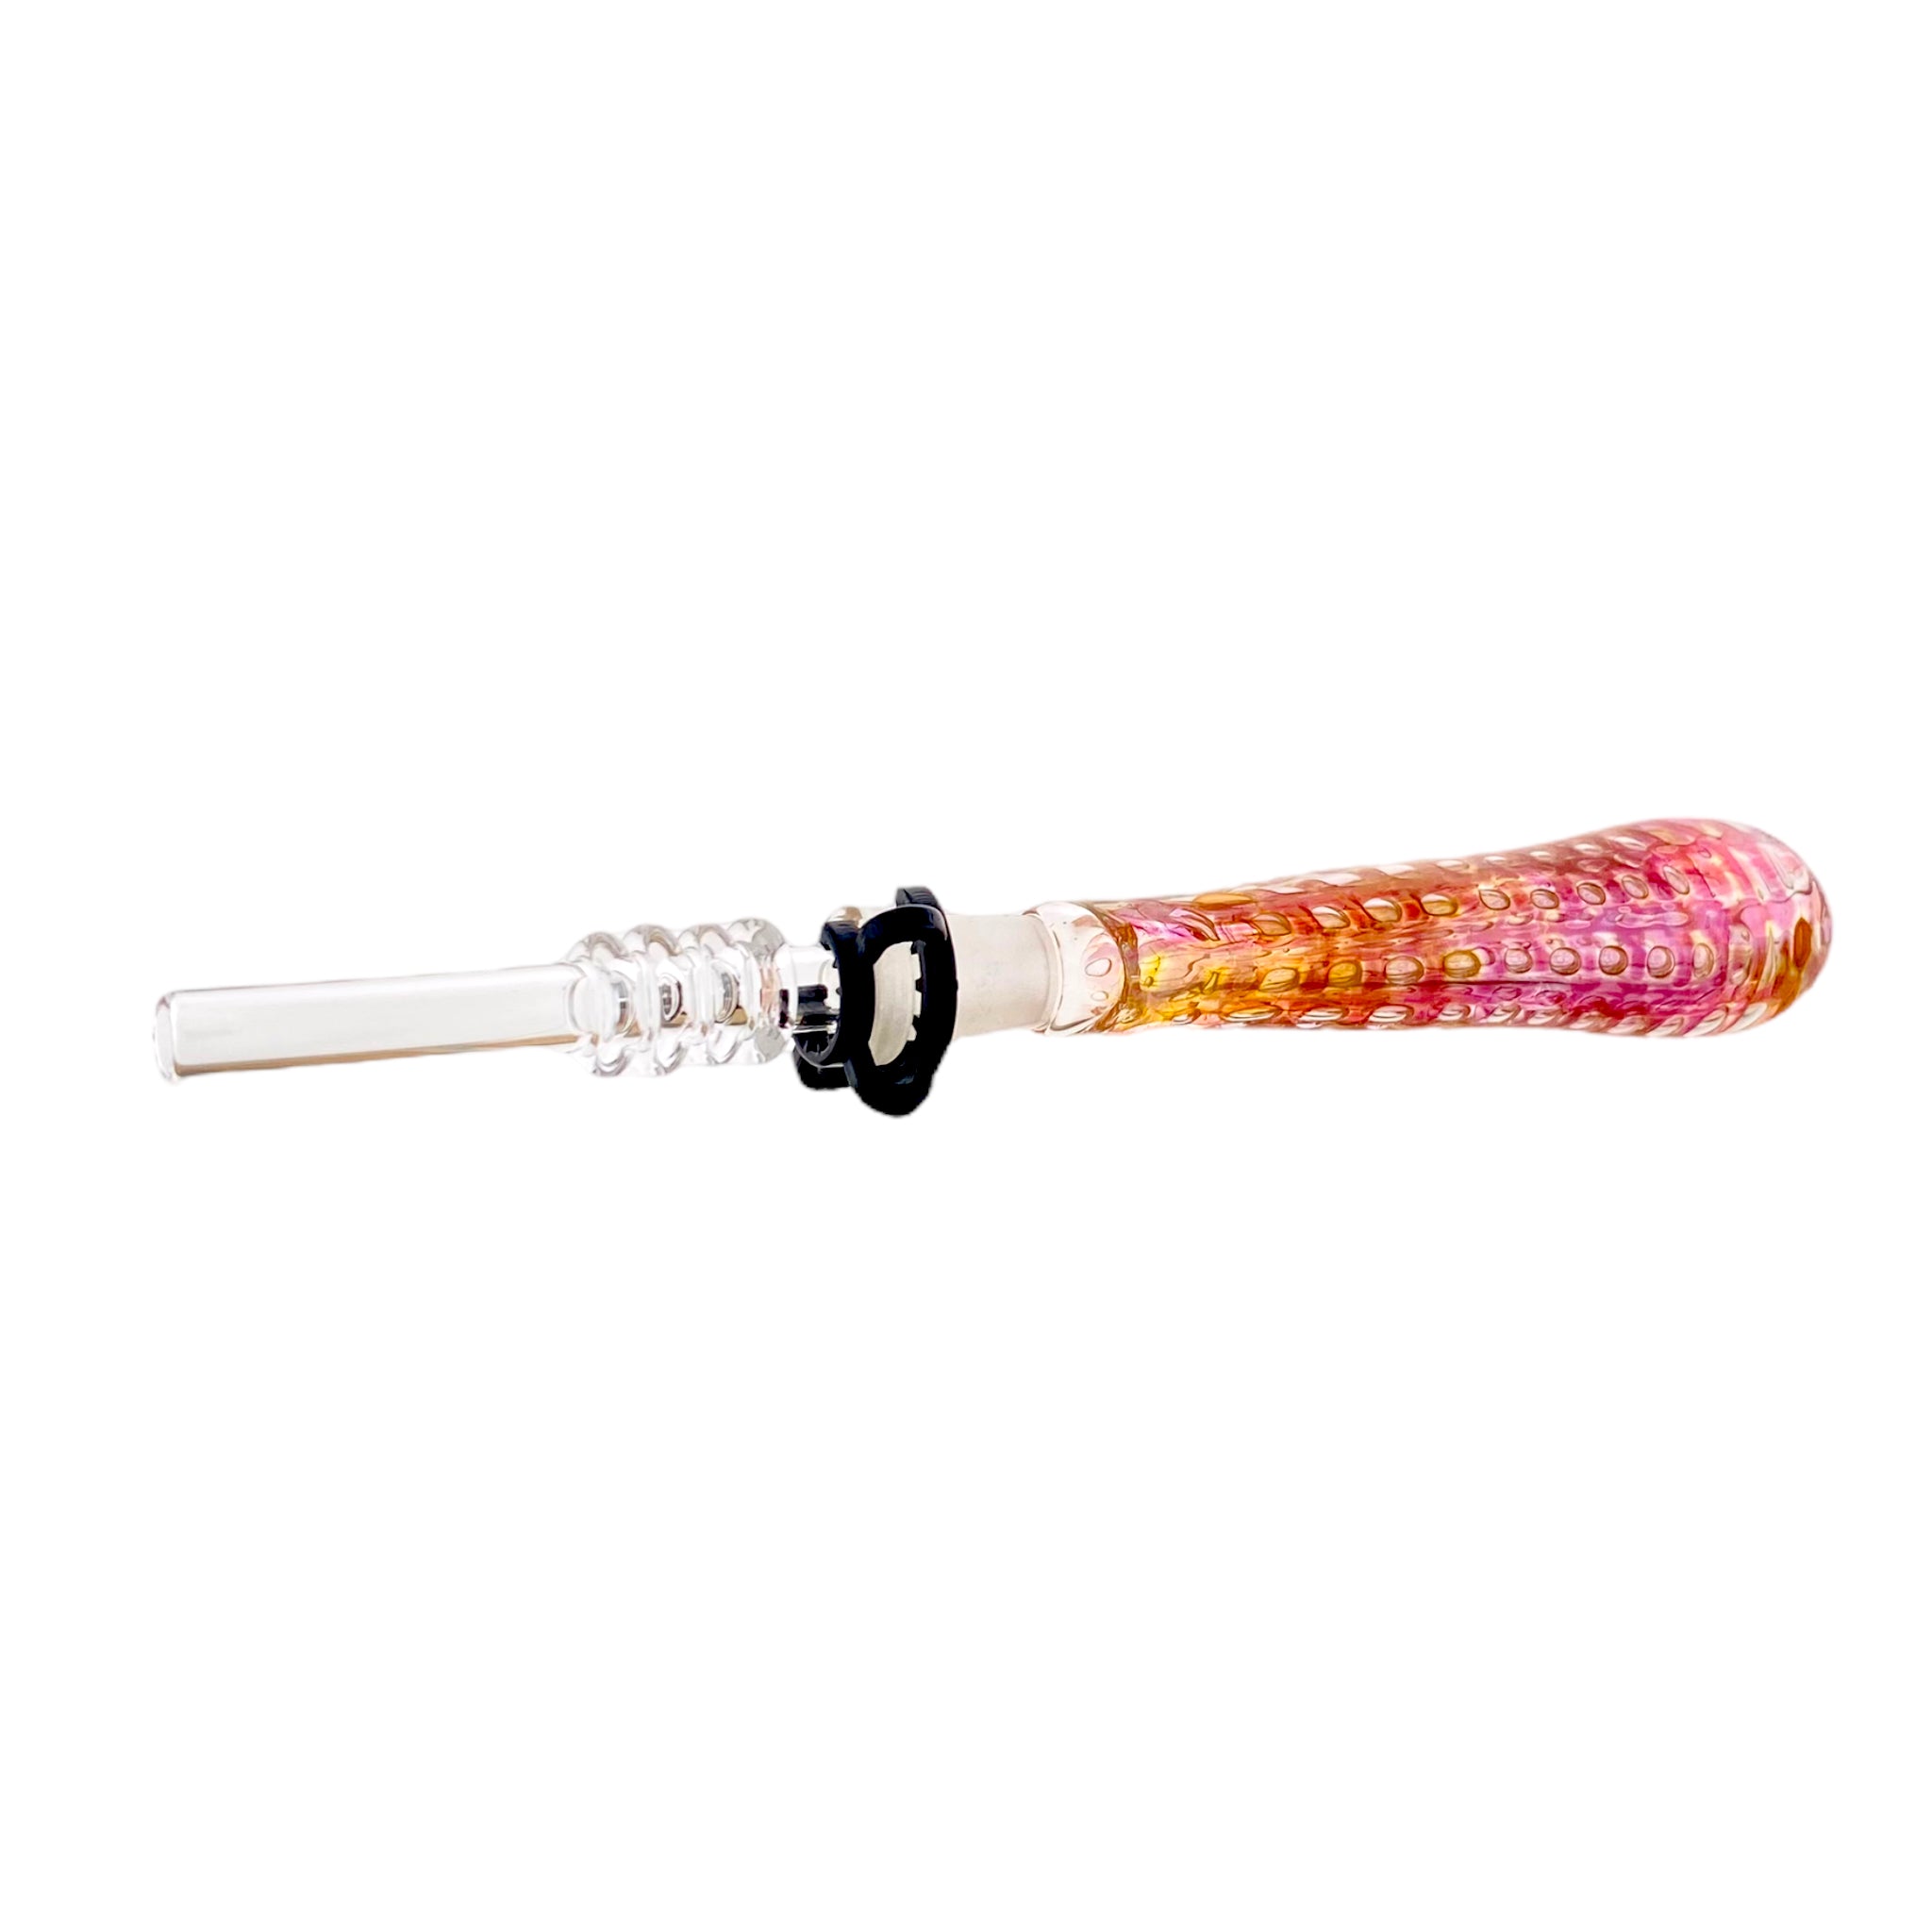 10mm Nectar Collector - Gold Fume With Air Trap Bubbles With 10mm Quartz Tip